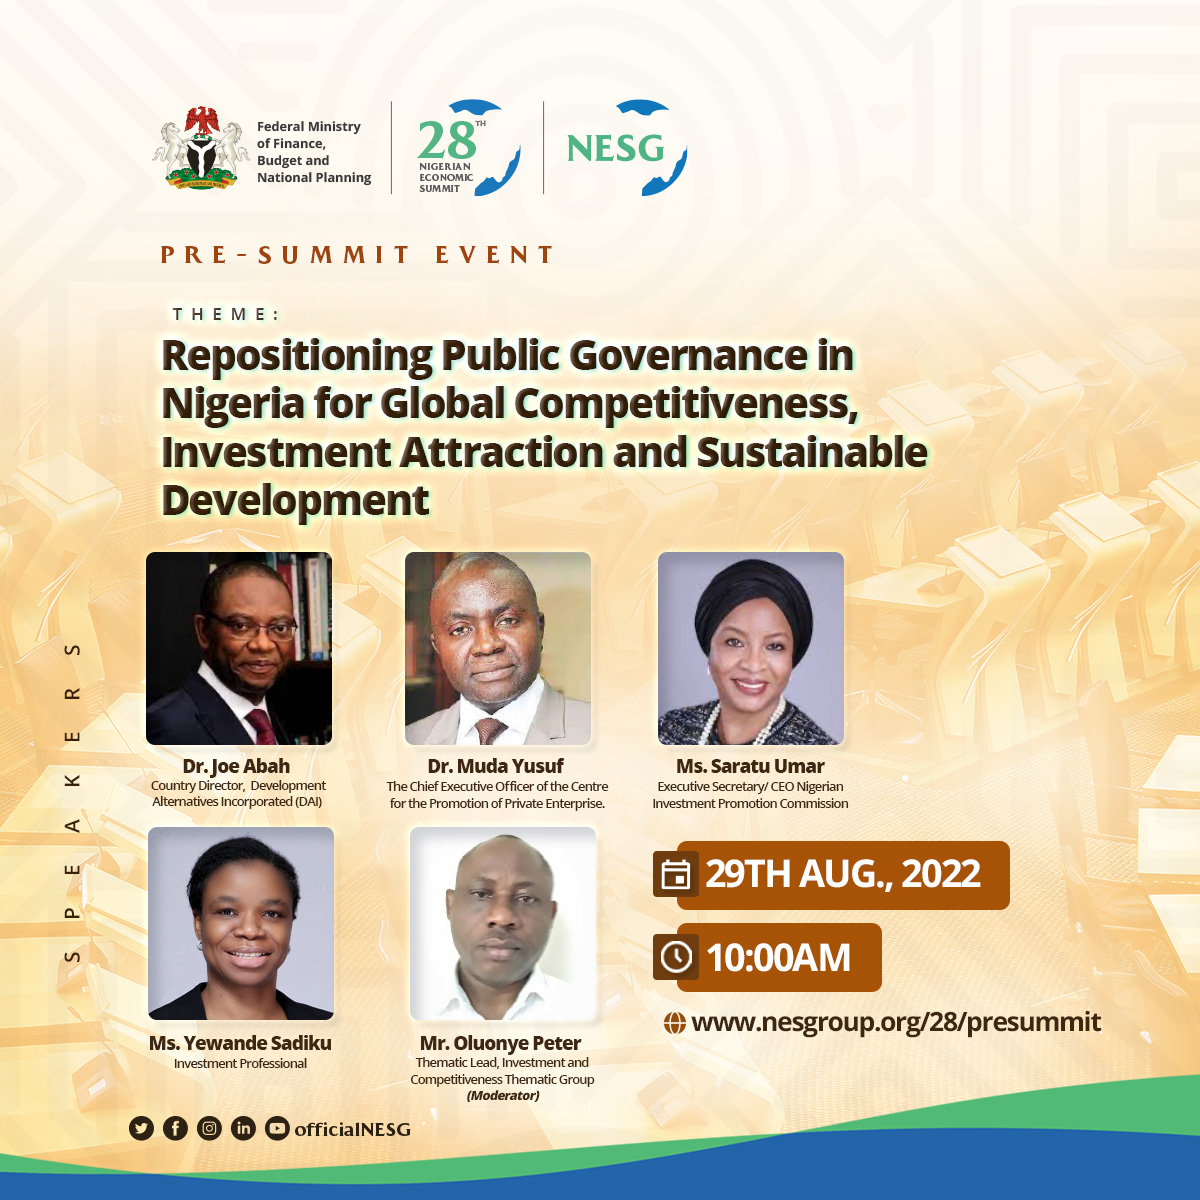 Repositioning Public Governance In Nigeria For Global Competitiveness, Investment Attraction And Sustainable Development, The Nigerian Economic Summit Group, The NESG, think-tank, think, tank, nigeria, policy, nesg, africa, number one think in africa, best think in nigeria, the best think tank in africa, top 10 think tanks in nigeria, think tank nigeria, economy, business, PPD, public, private, dialogue, Nigeria, Nigeria PPD, NIGERIA, PPD